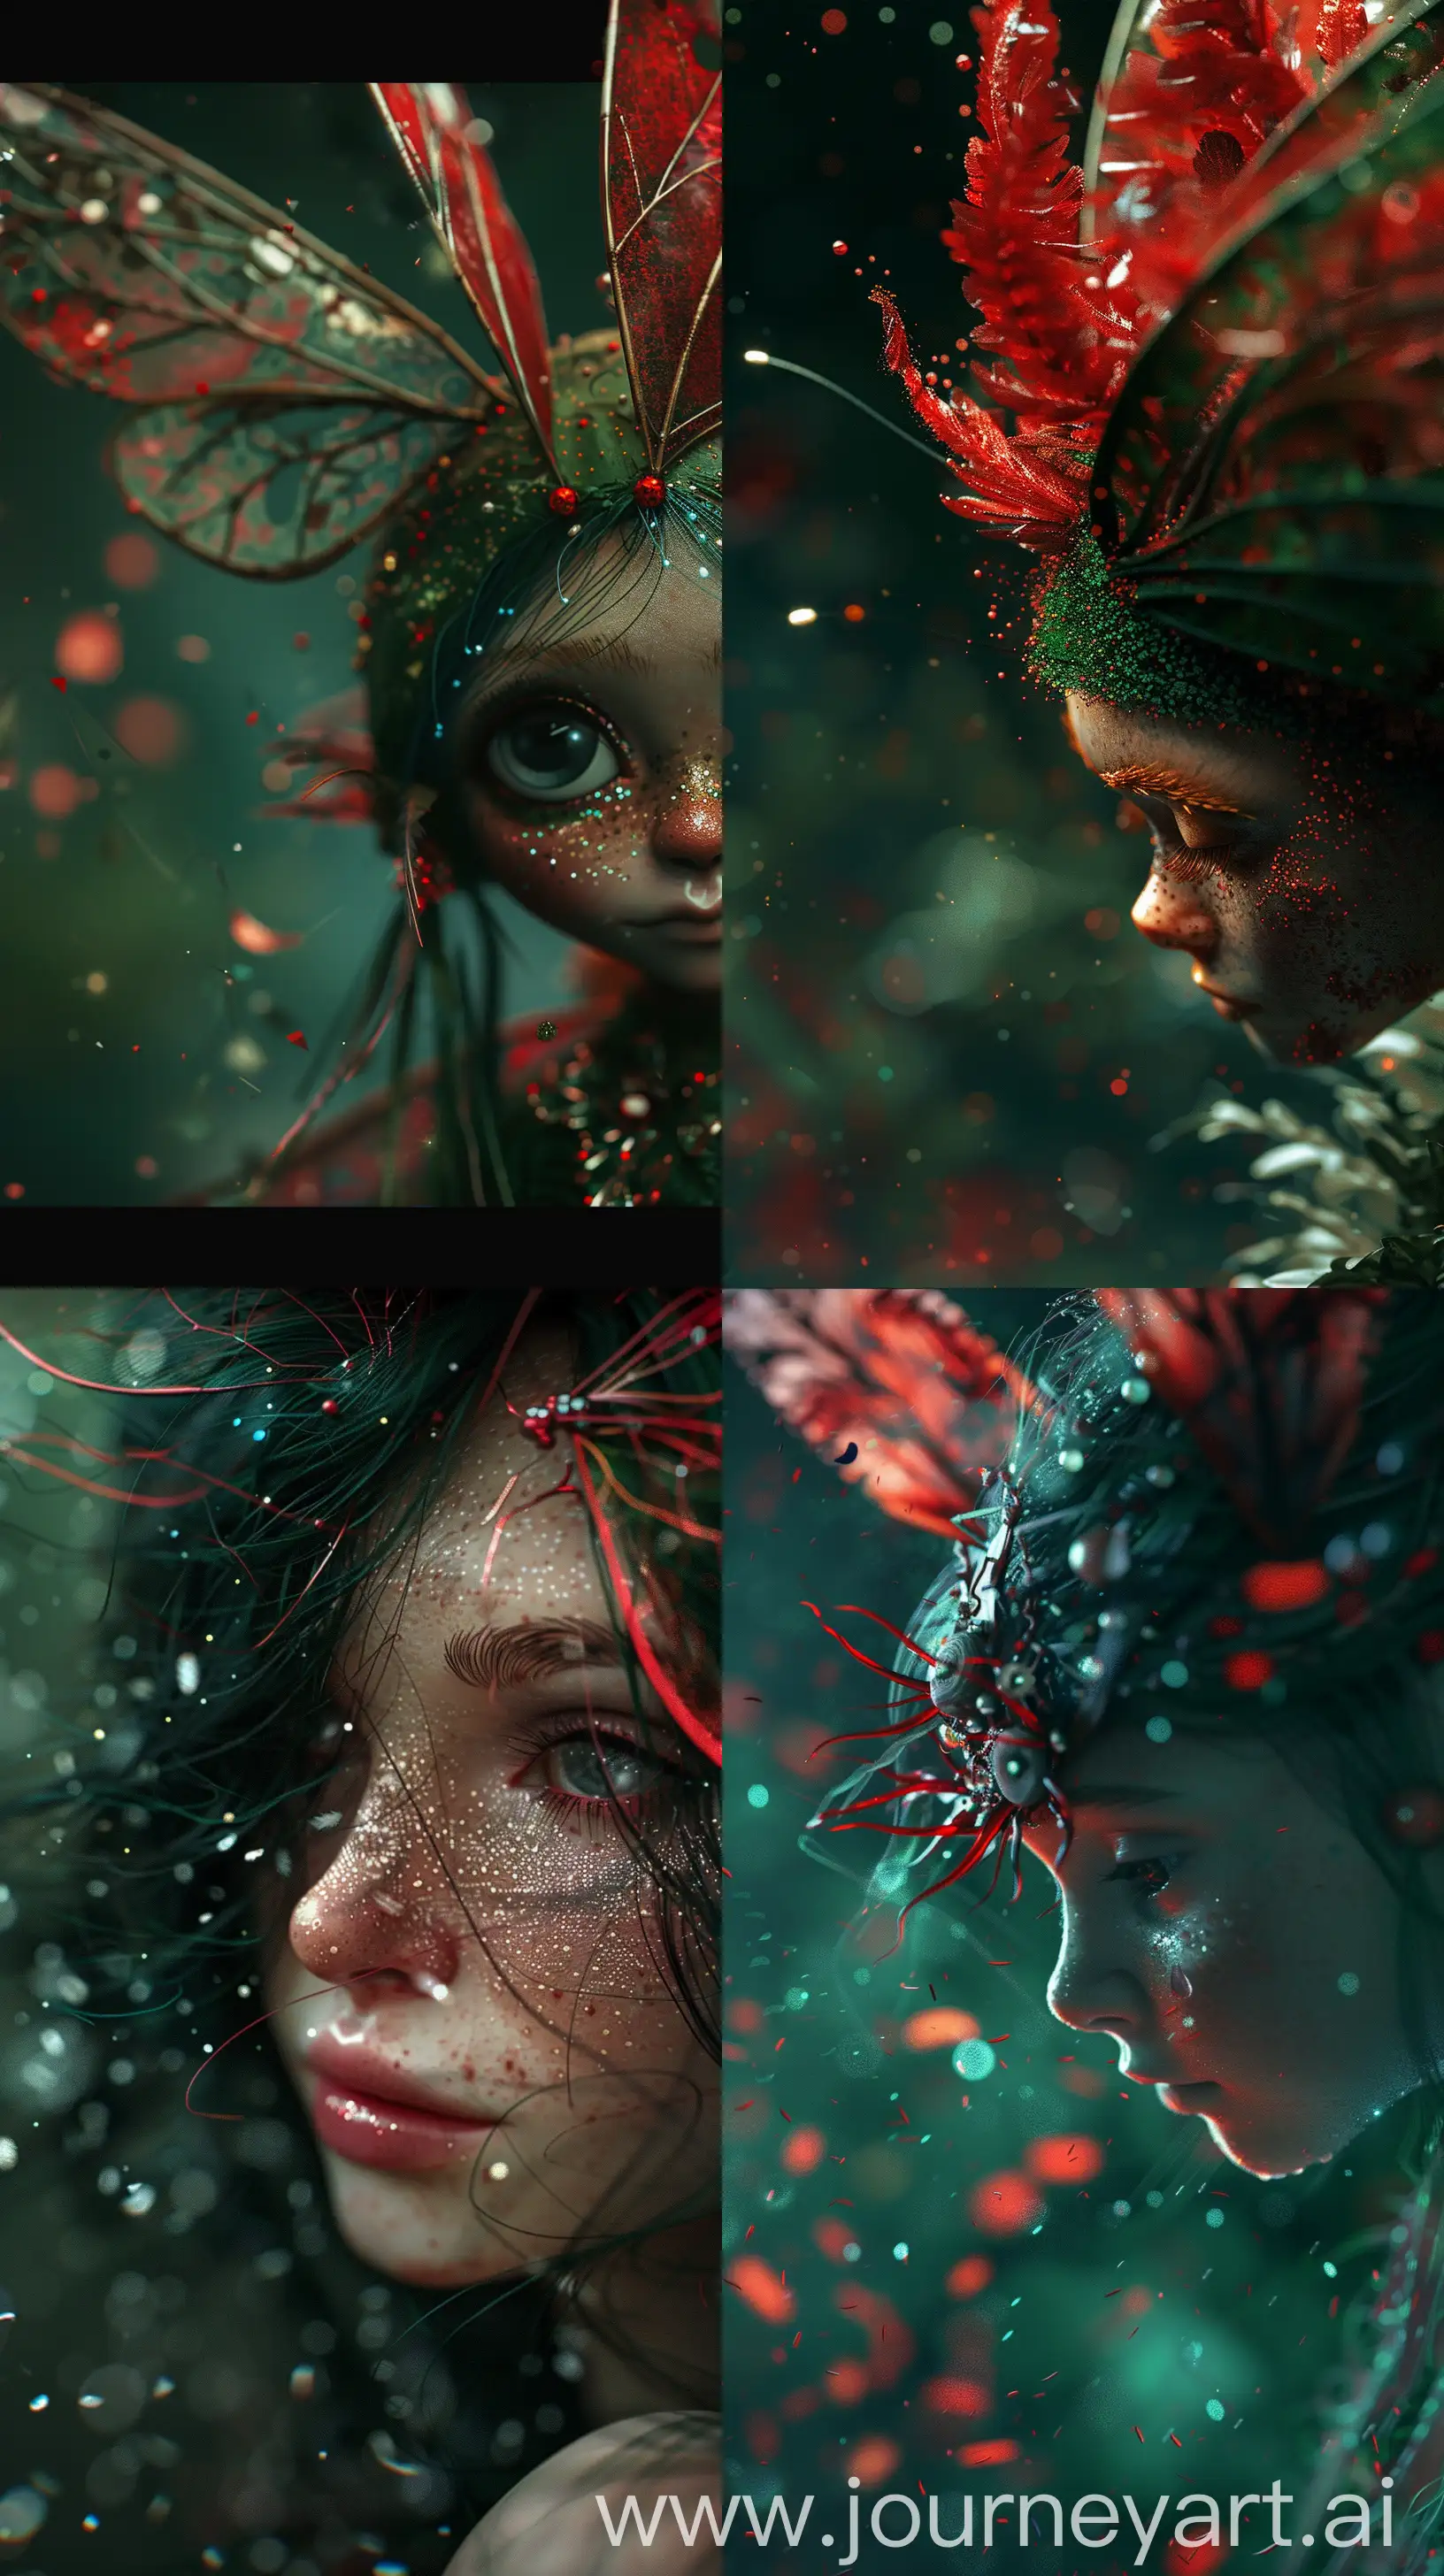 Enchanting-CloseUp-of-Otherworldly-Fairy-in-Surreal-Dark-Green-and-Red-Setting